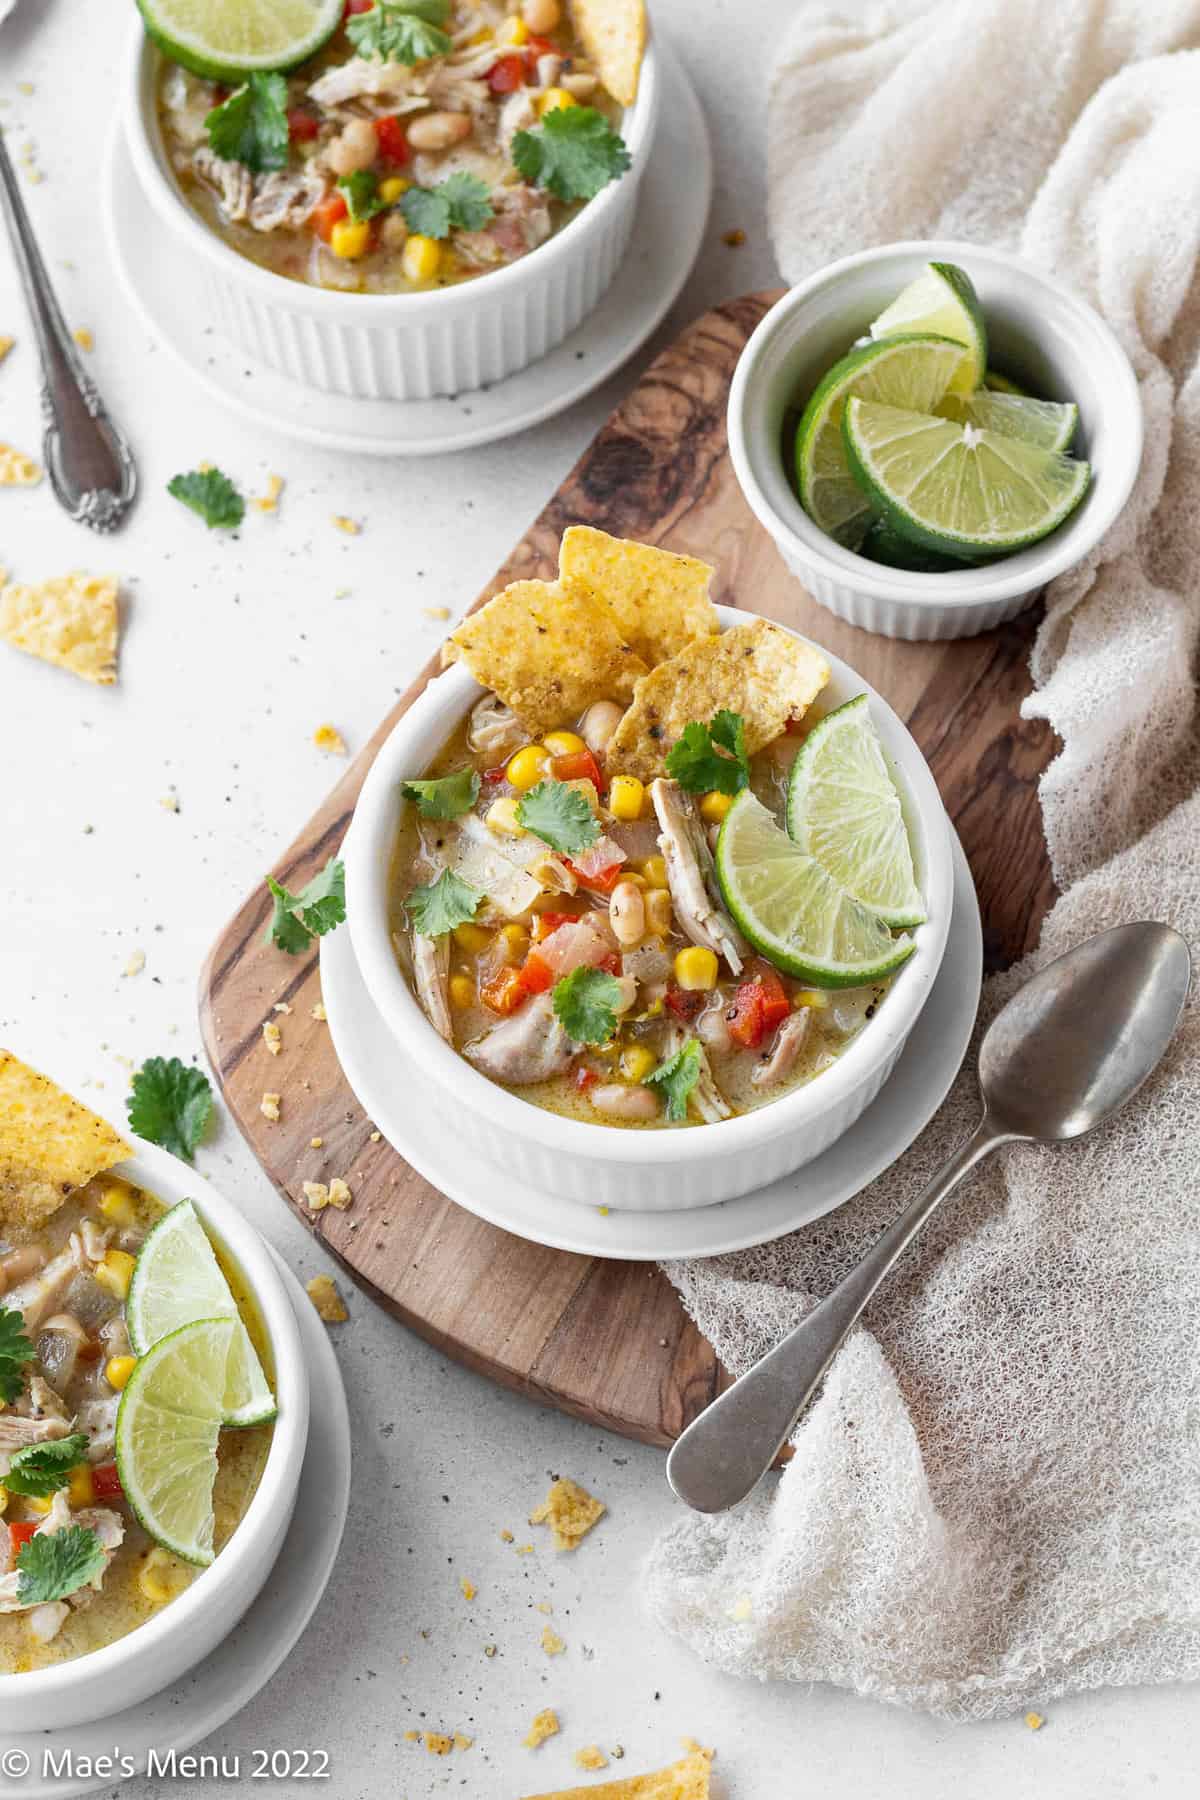 Bowls of creamy white chicken tortilla soup with limes, tortilla chips, and spoons.